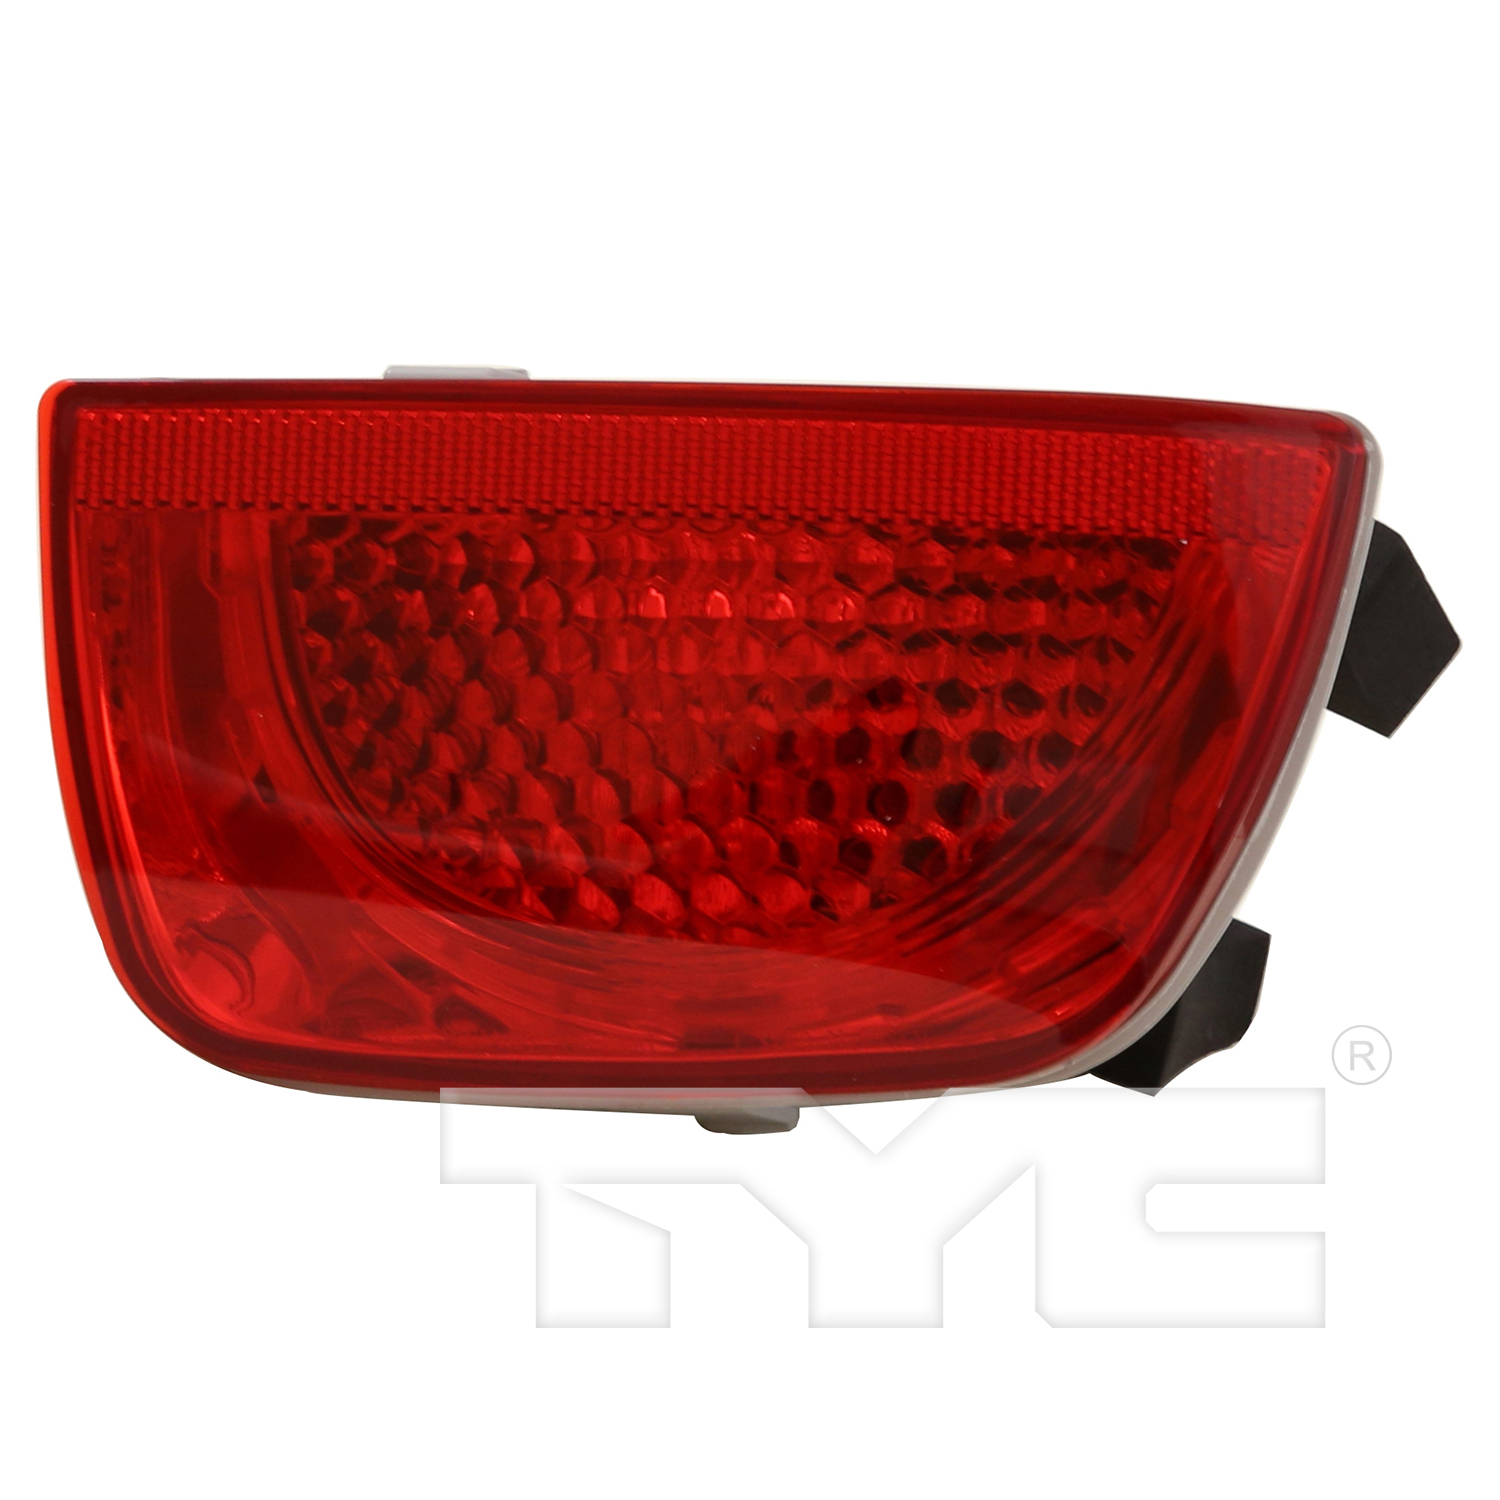 Aftermarket TAILLIGHTS for CHEVROLET - CAMARO, CAMARO,10-13,RT Taillamp assy outer